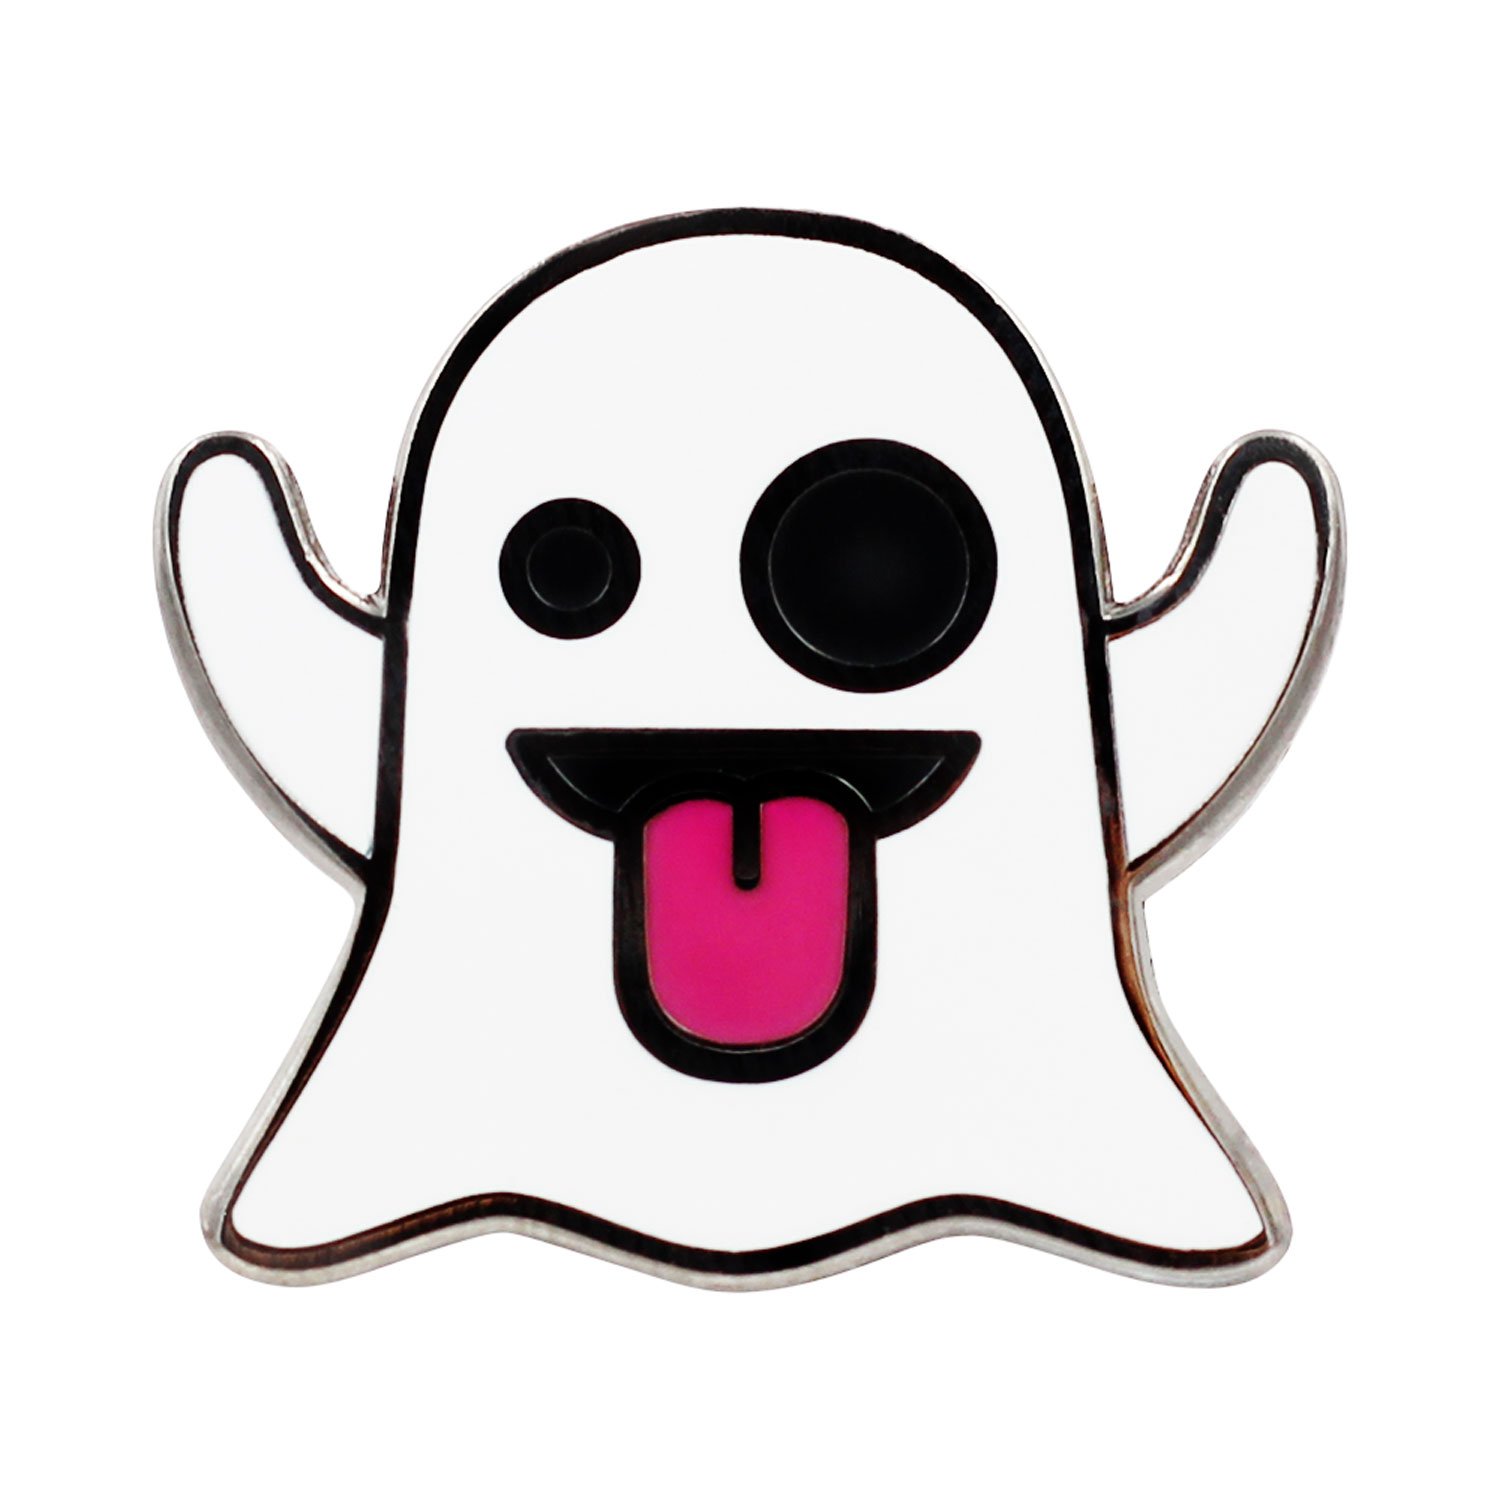 clipart ghost real ghost